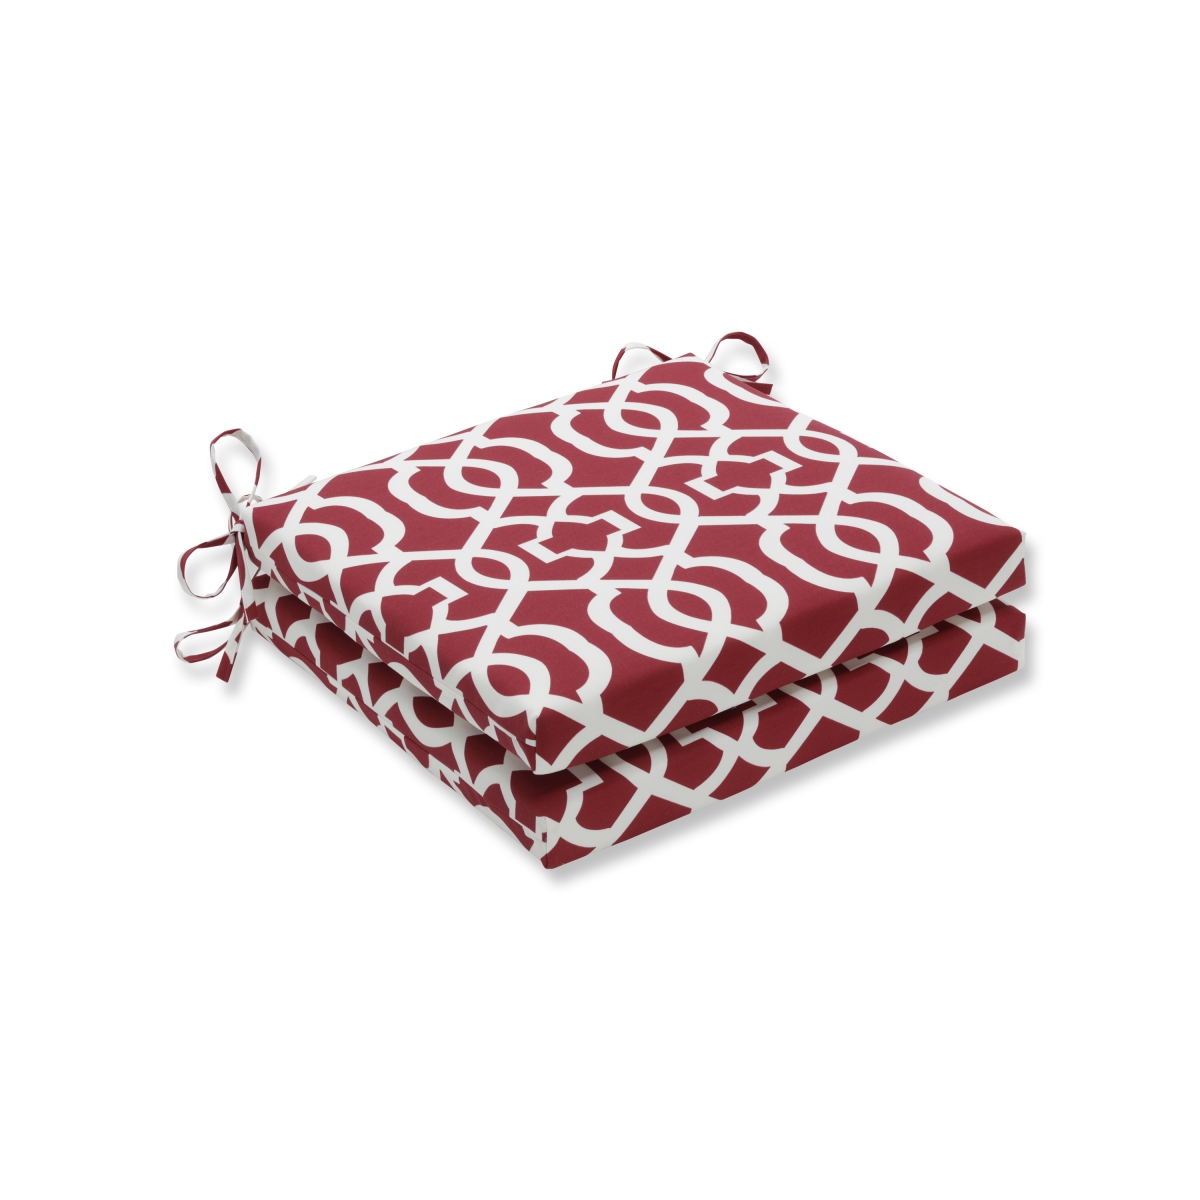 614007 20 X 20 X 3 In. Outdoor & Indoor New Geo Squared Corners Seat Cushion, Red - Set Of 2